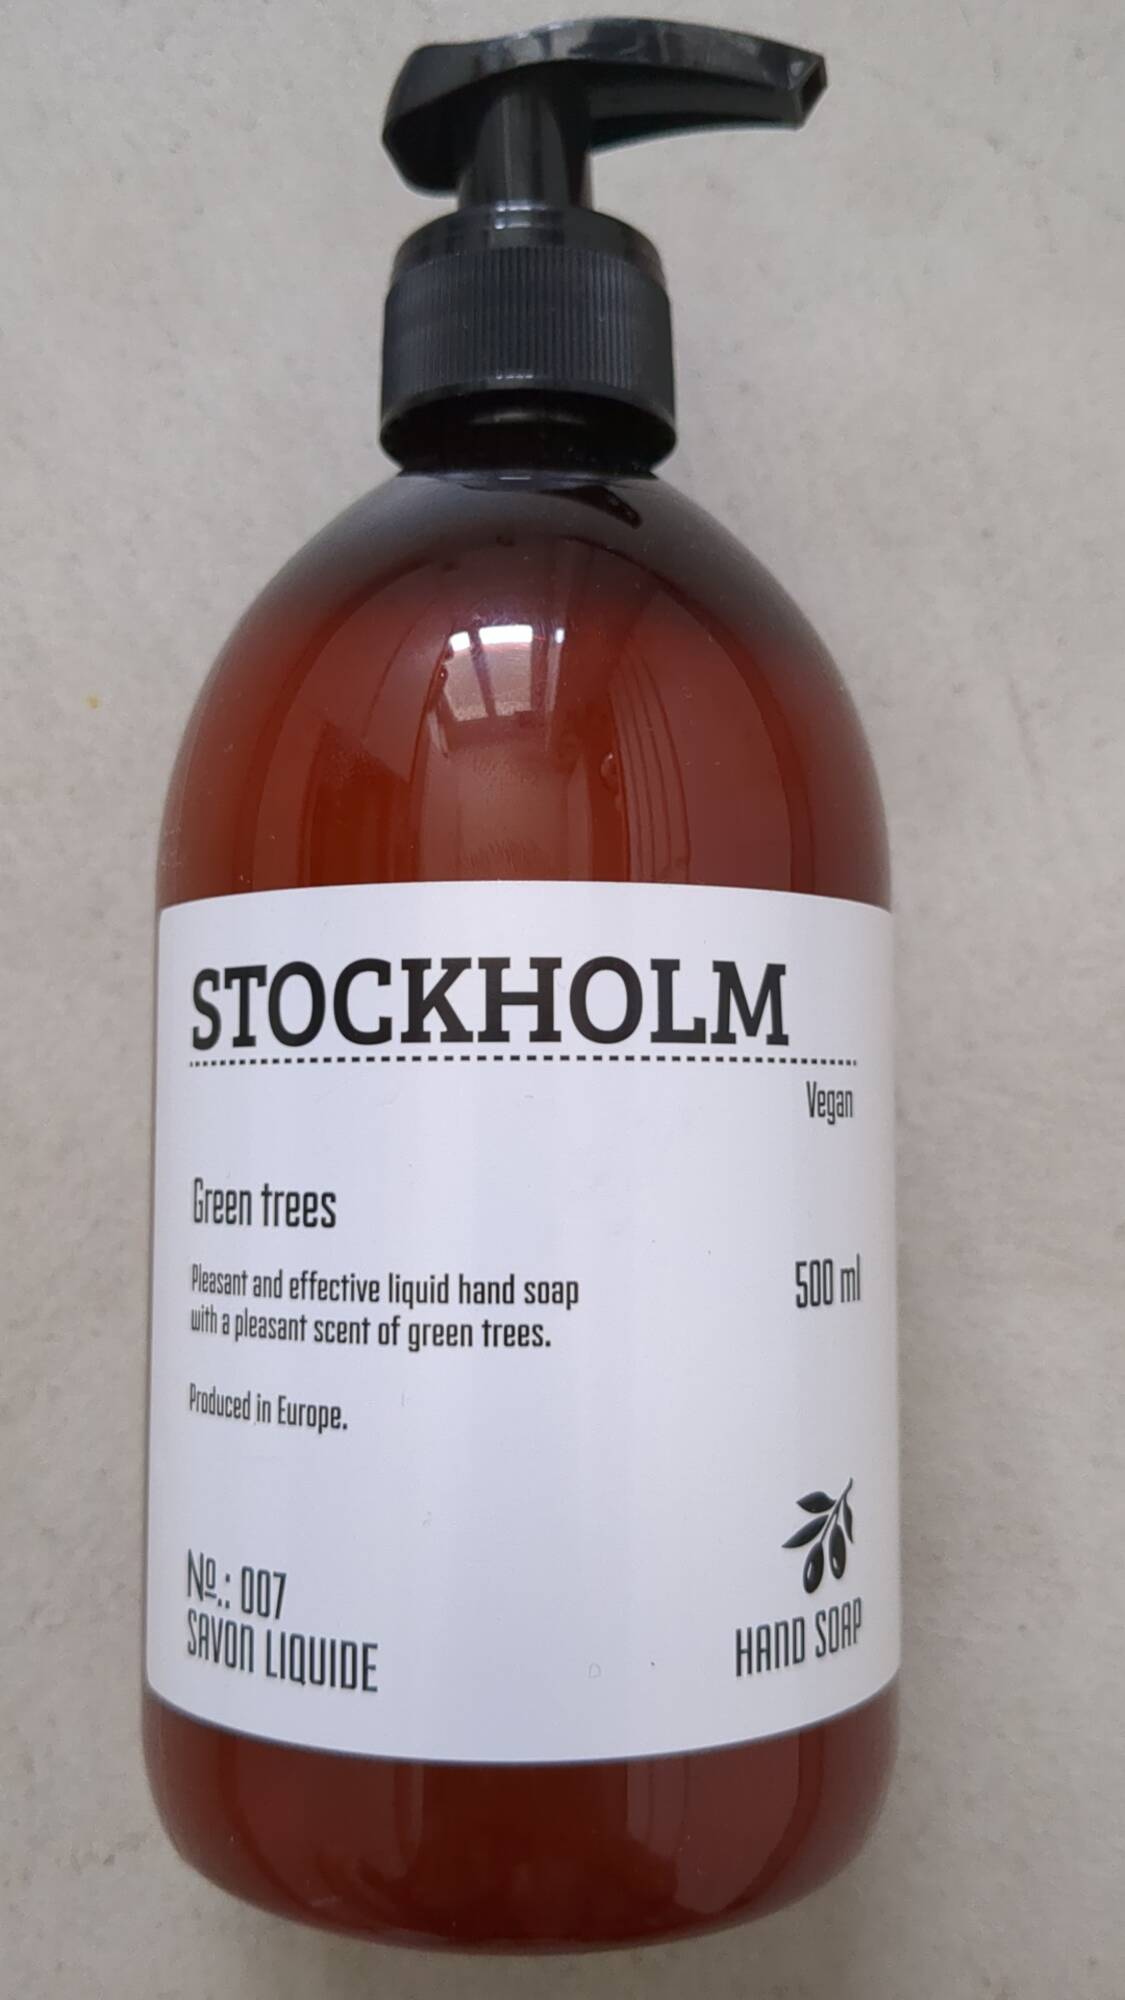 STOCKHOLM - Green trees - Hand soap 